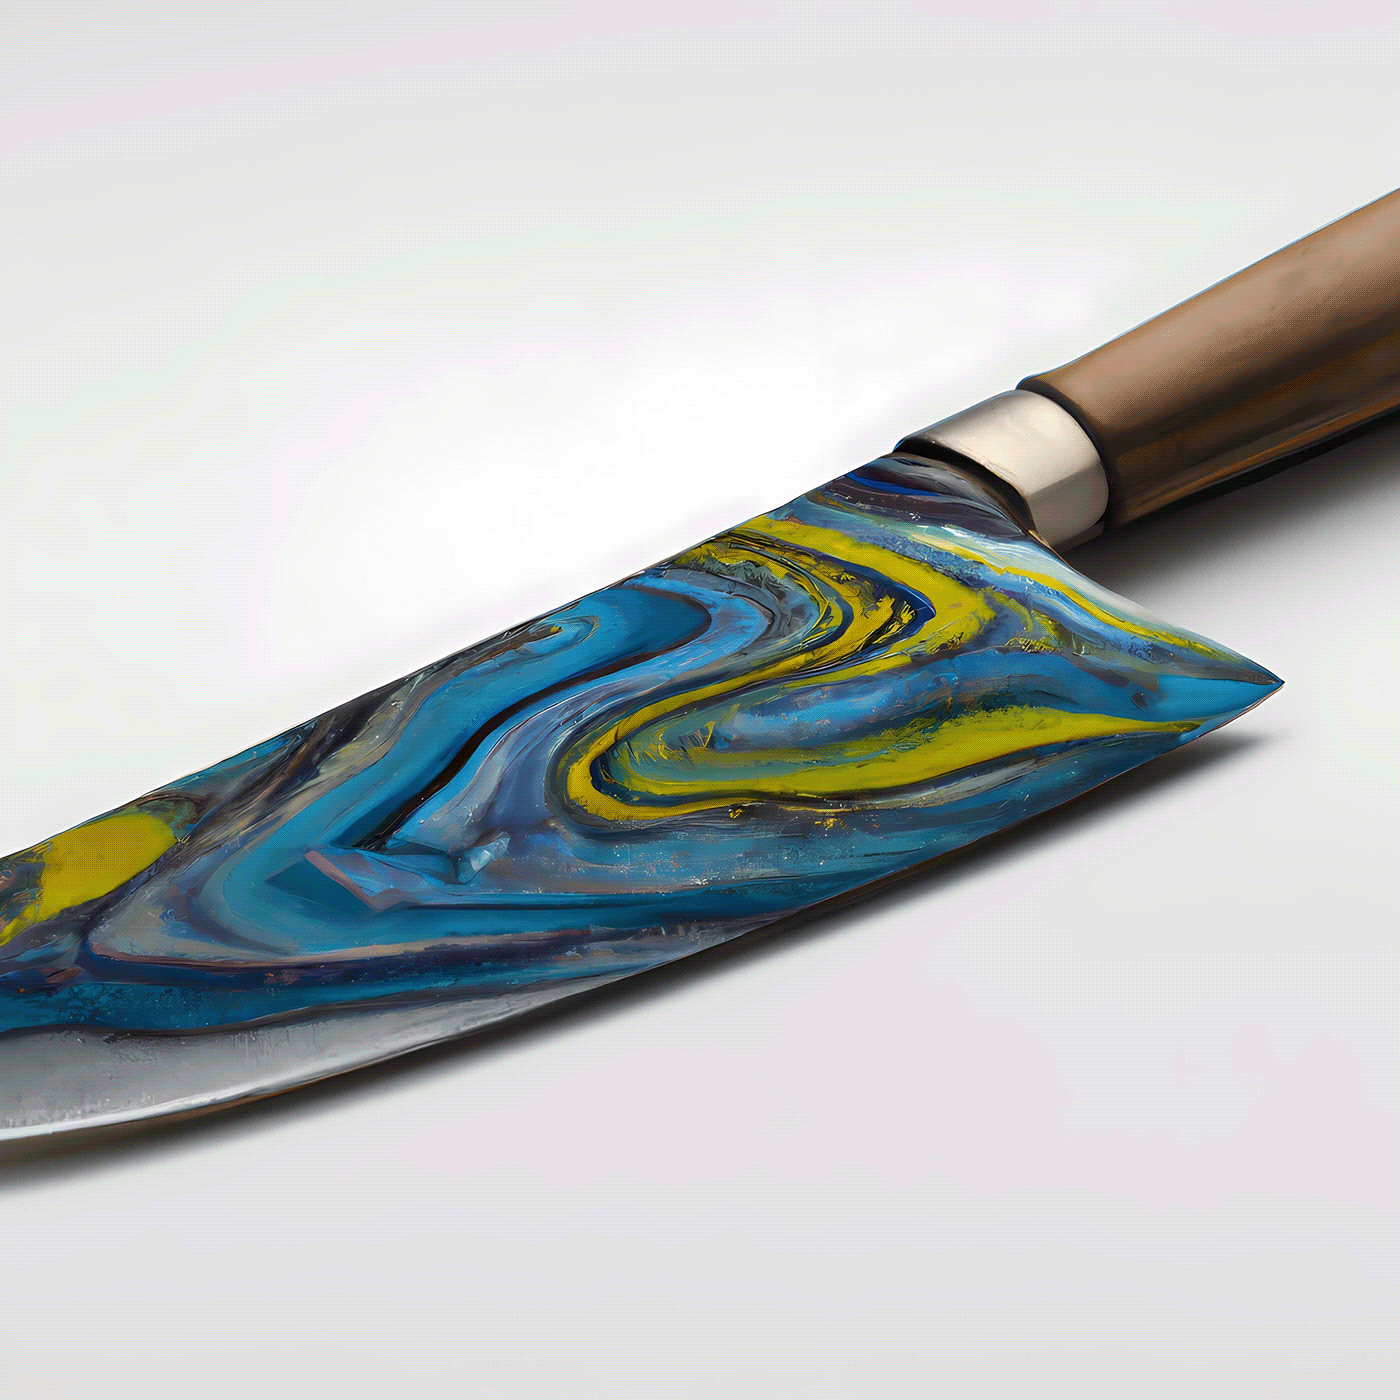 Damascus industrial knife metal painting   product design  steel